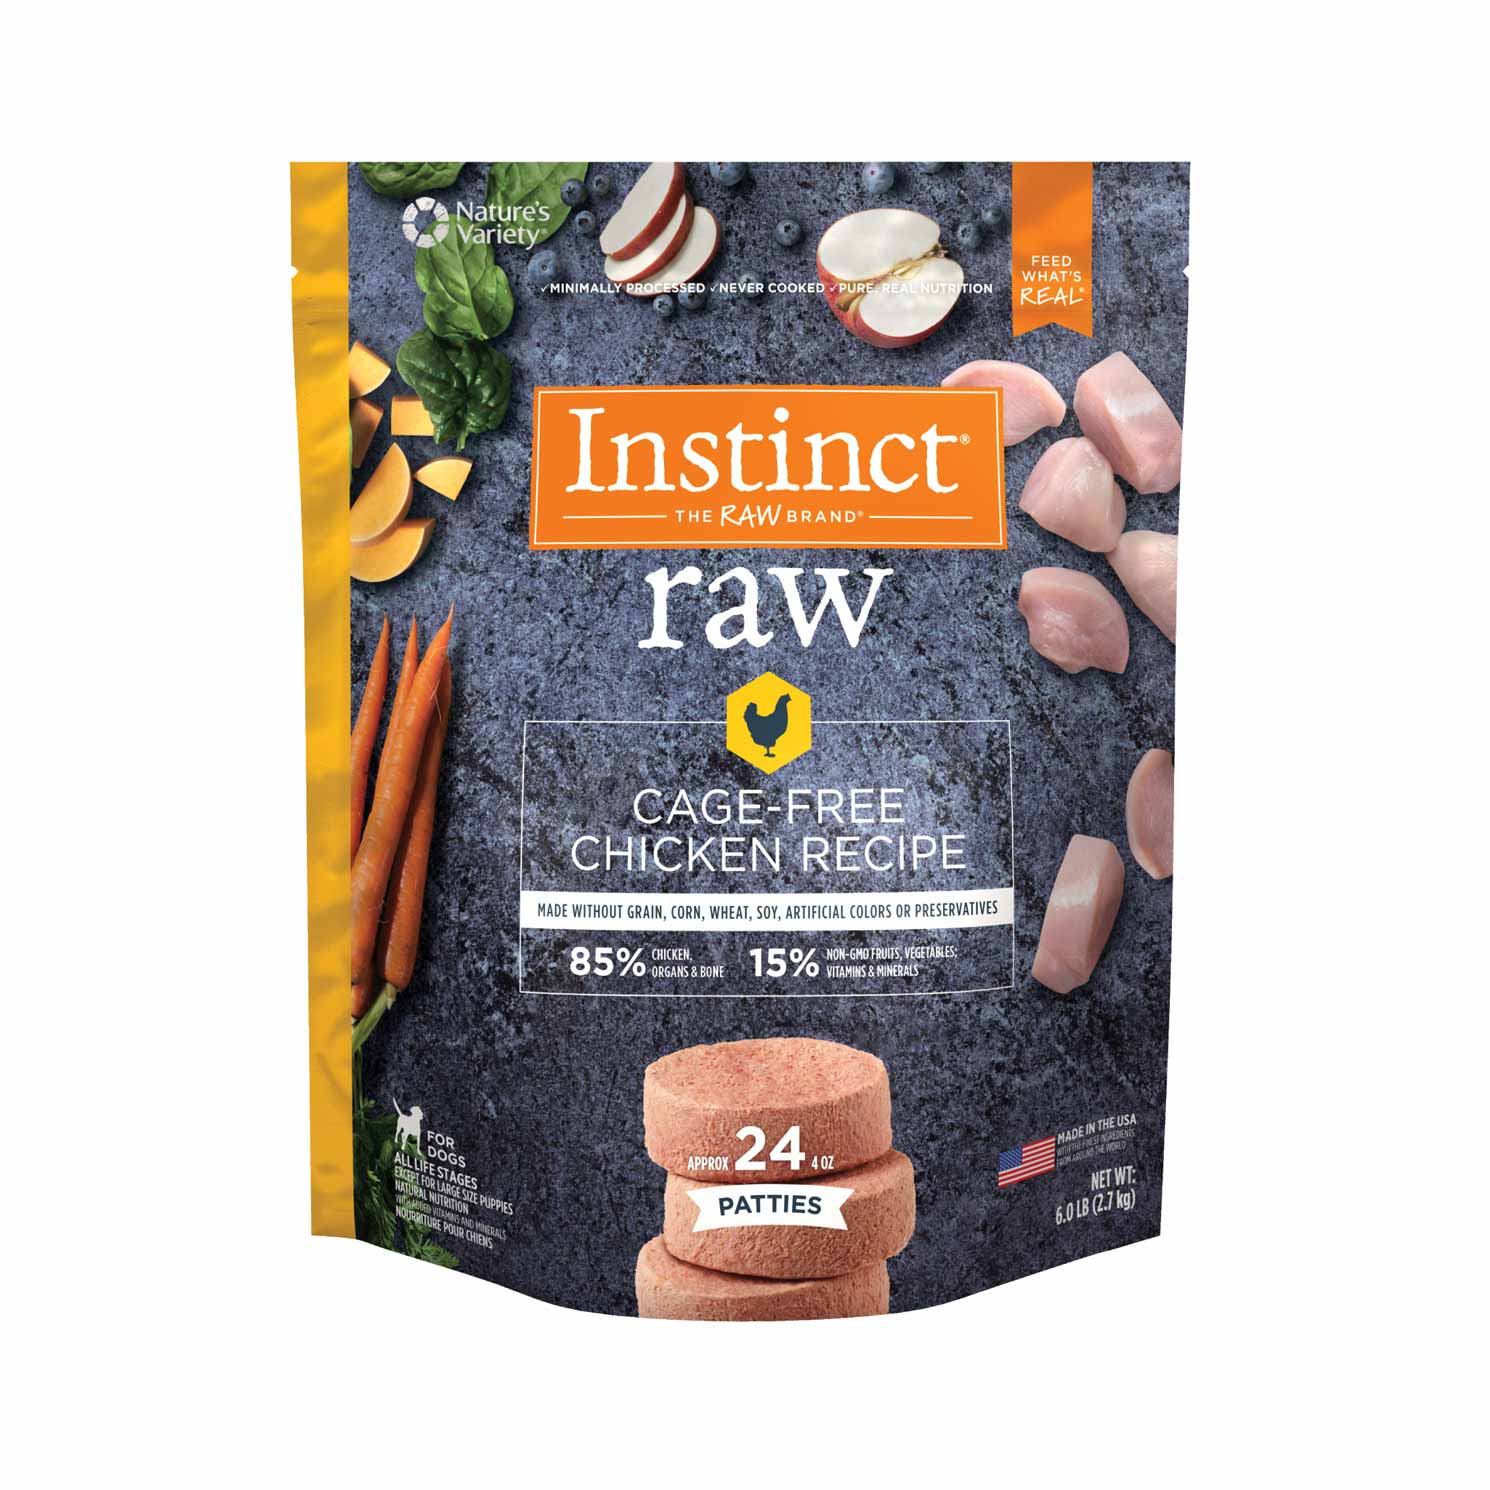 Instinct Frozen Raw Patties Grain-Free Cage-Free Chicken Recipe Dog Food, 6 Pound Bag - Not Available for Delivery